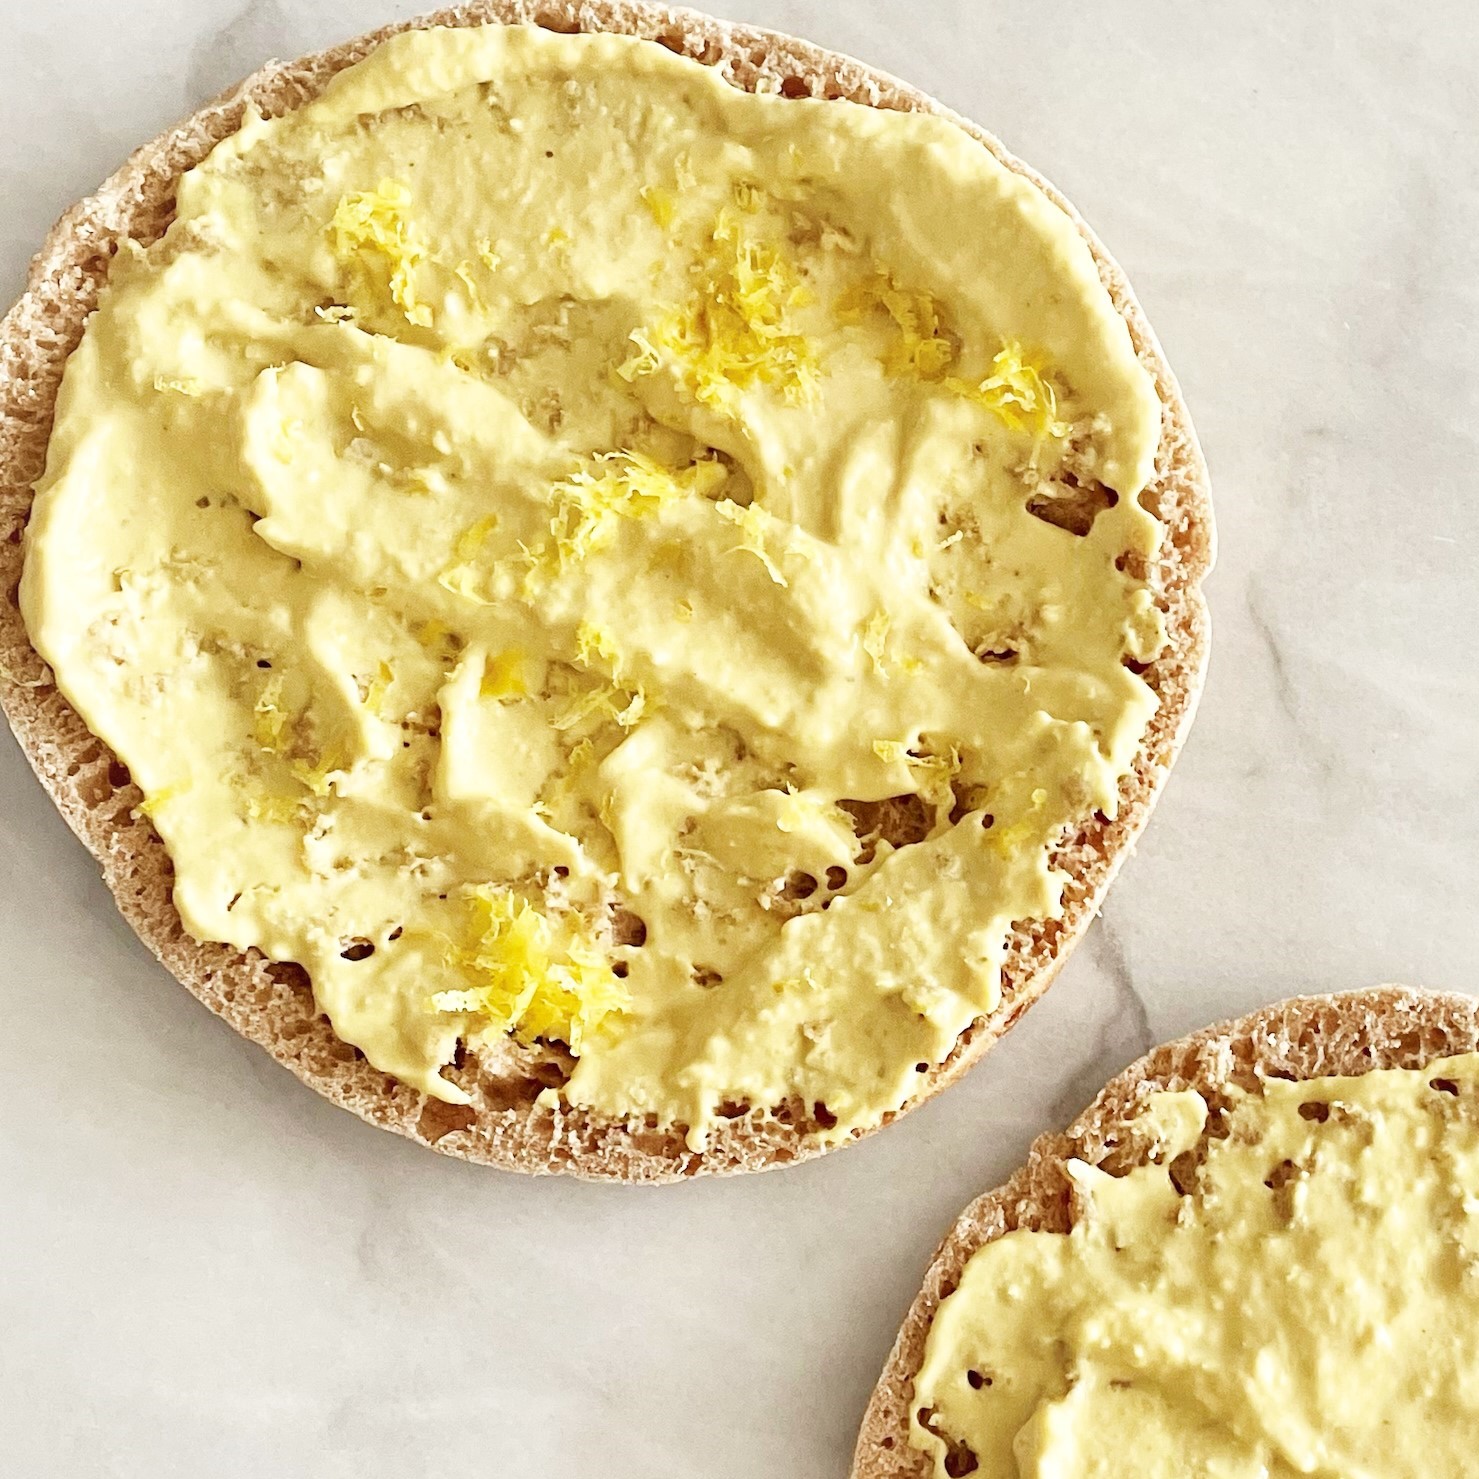 Pita round topped with roasted yellow pepper hummus